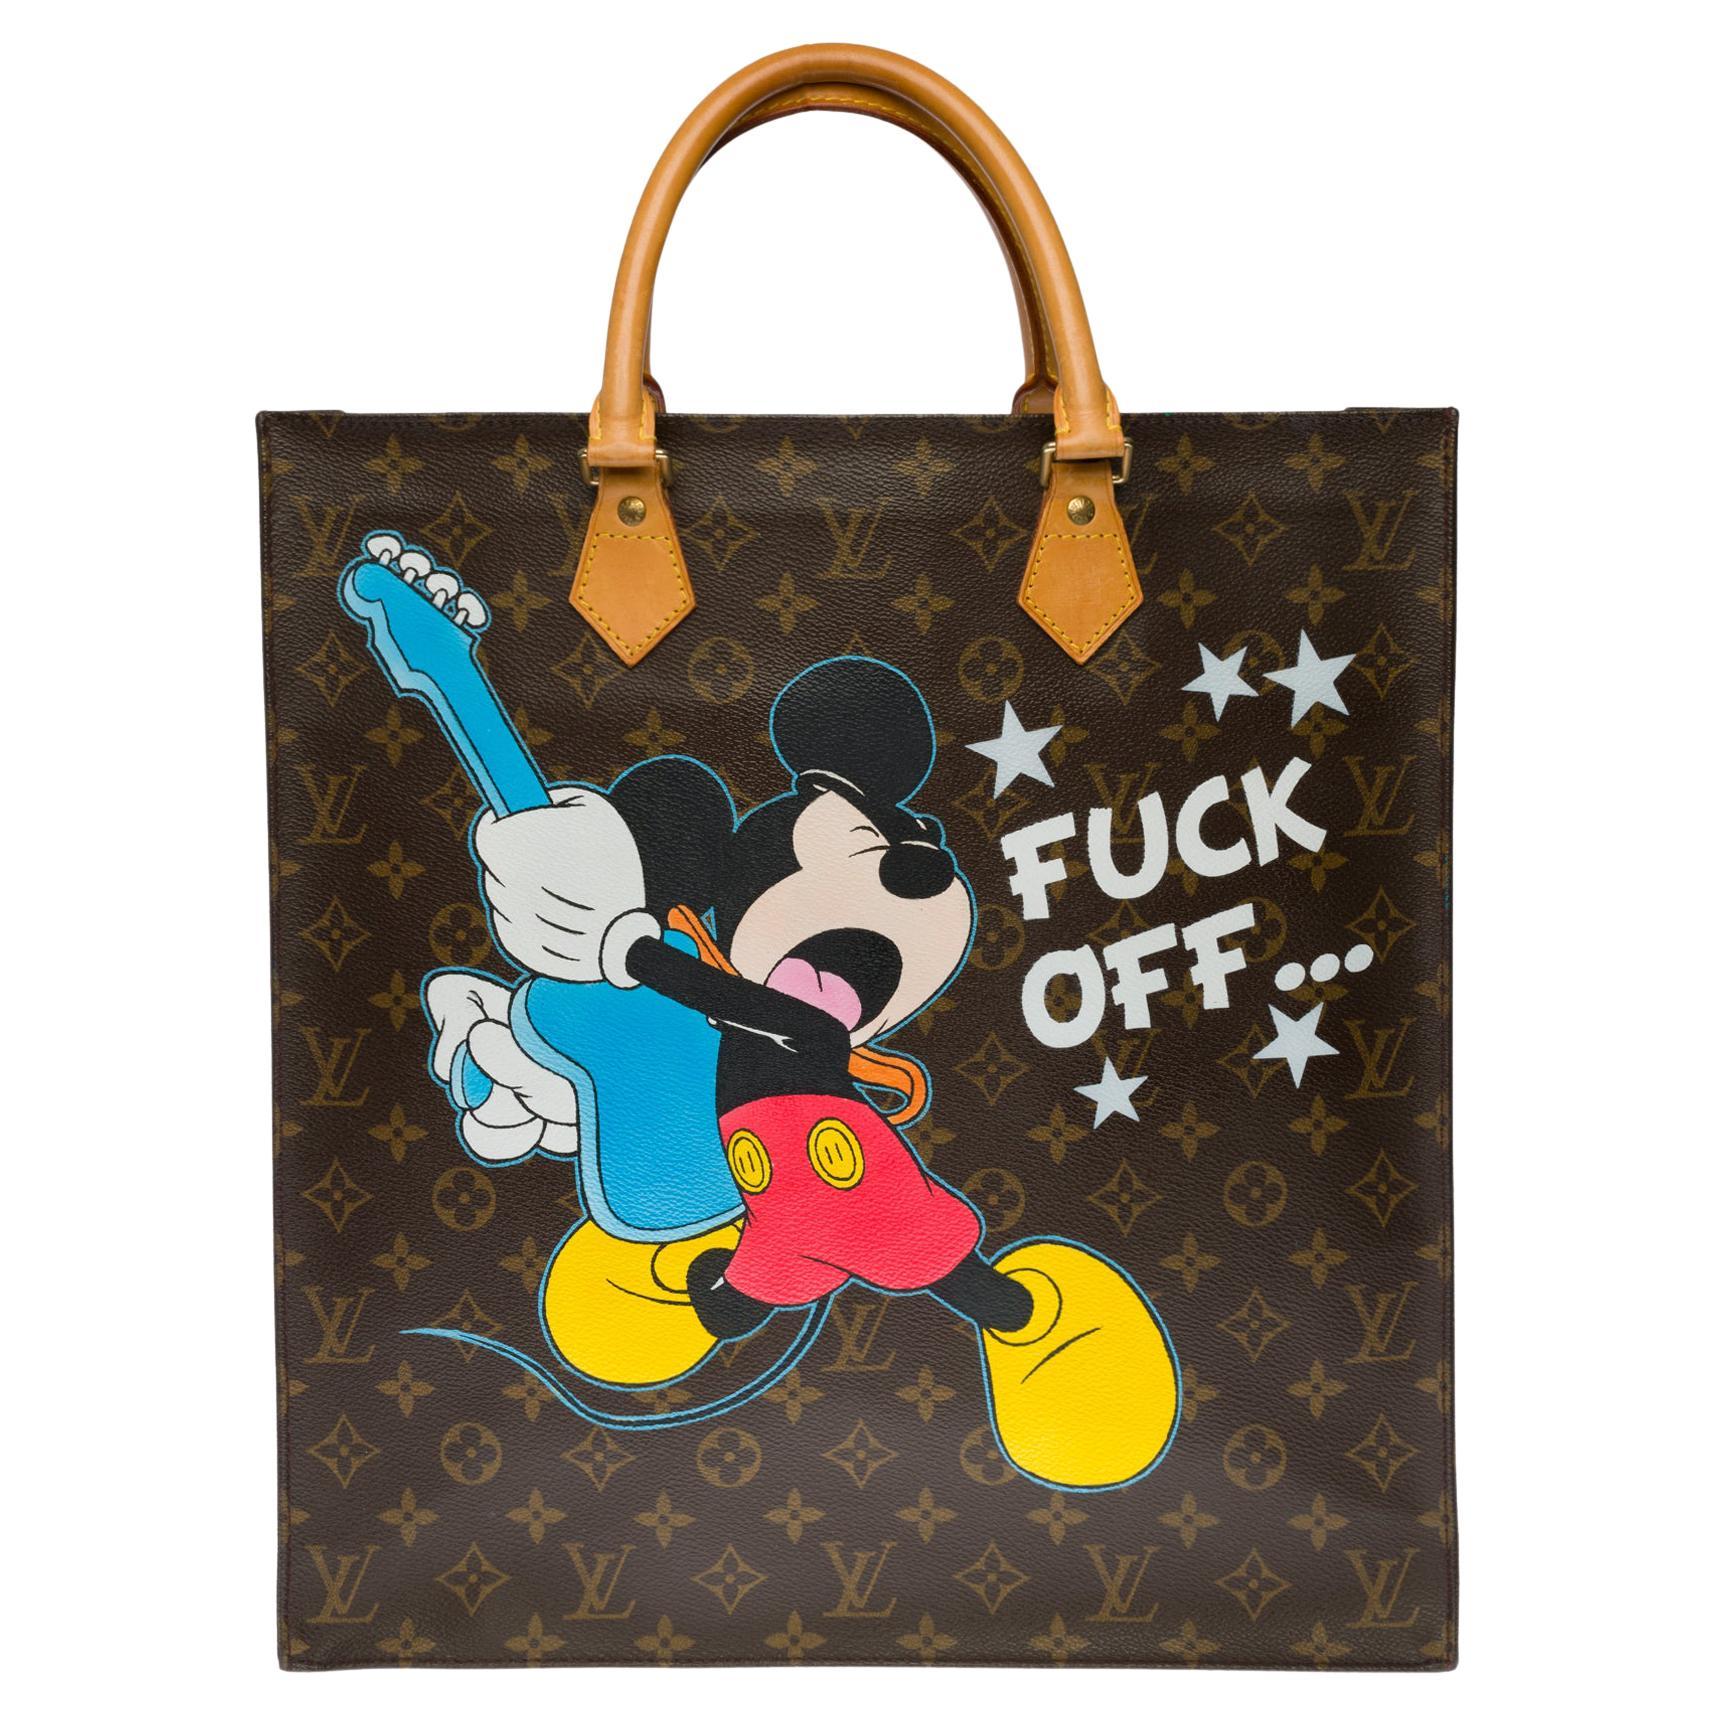 Customized Louis Vuitton Plat "Fuck Off" in brown canvas and natural leather